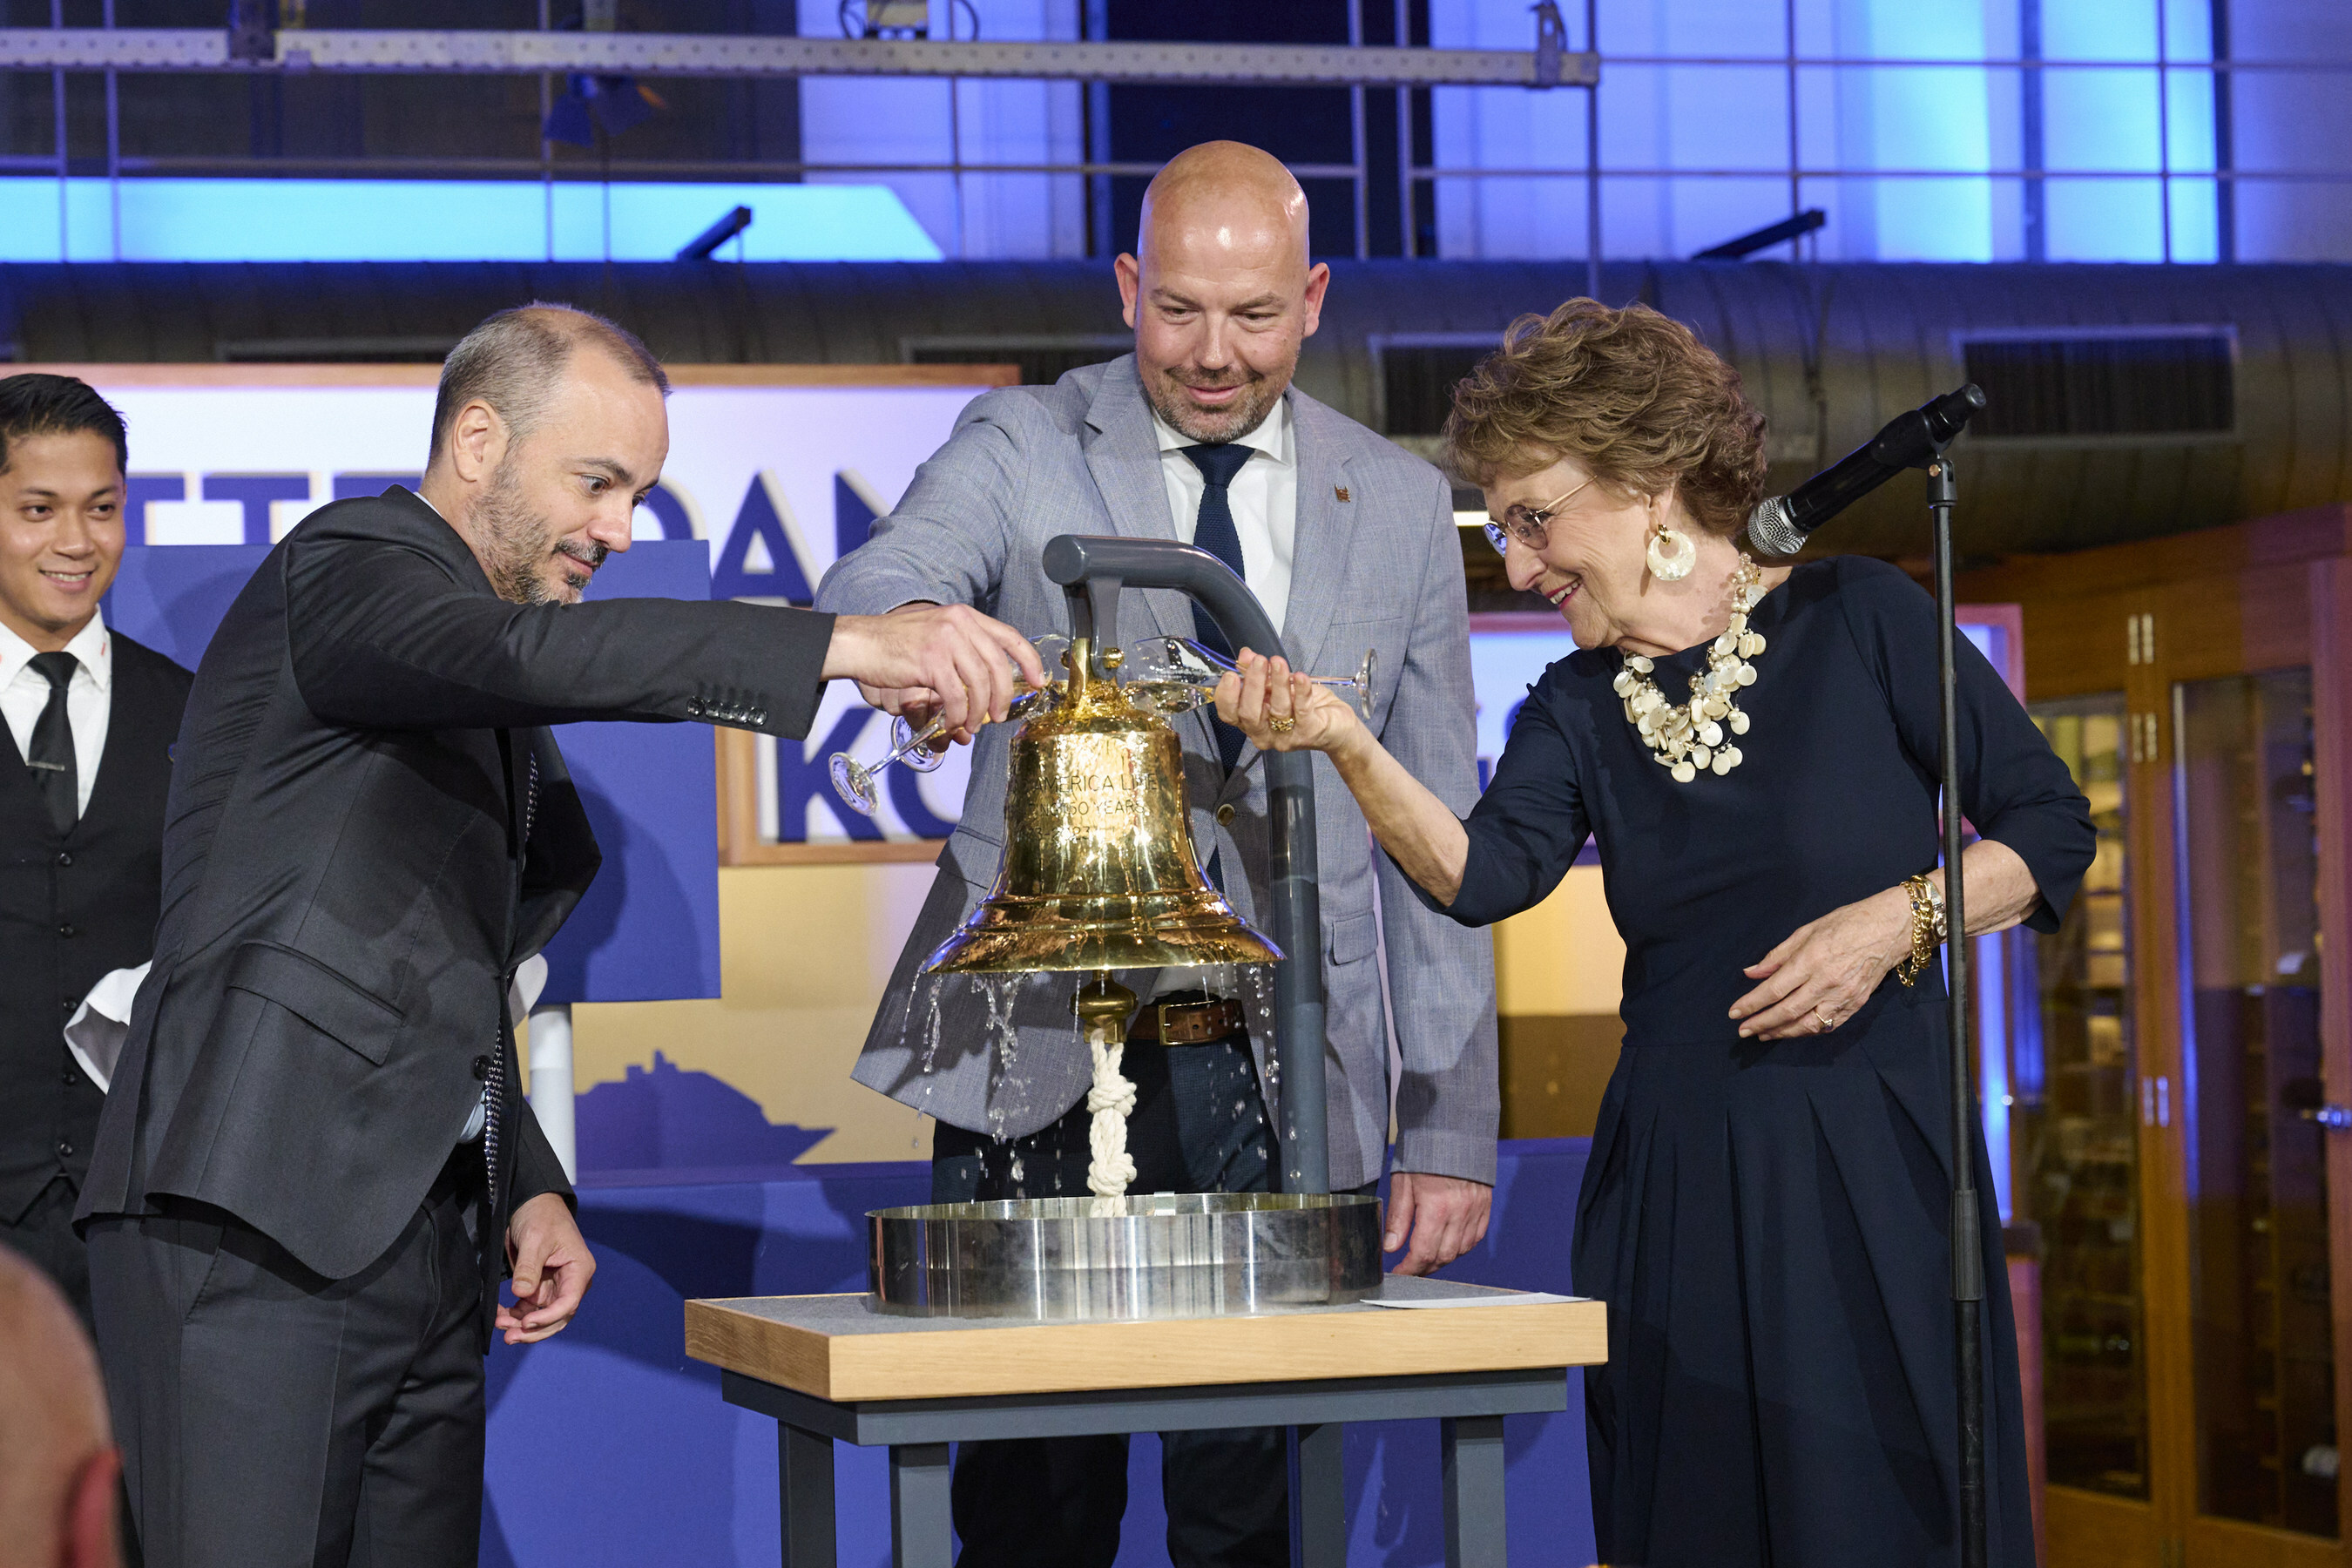 L-R: Princess Margriet of the Netherlands, Roel Dusseldorp (GM of Hotel New York), and Holland America Line President Gus Antorcha (Image at LateCruiseNews.com - April 2023)